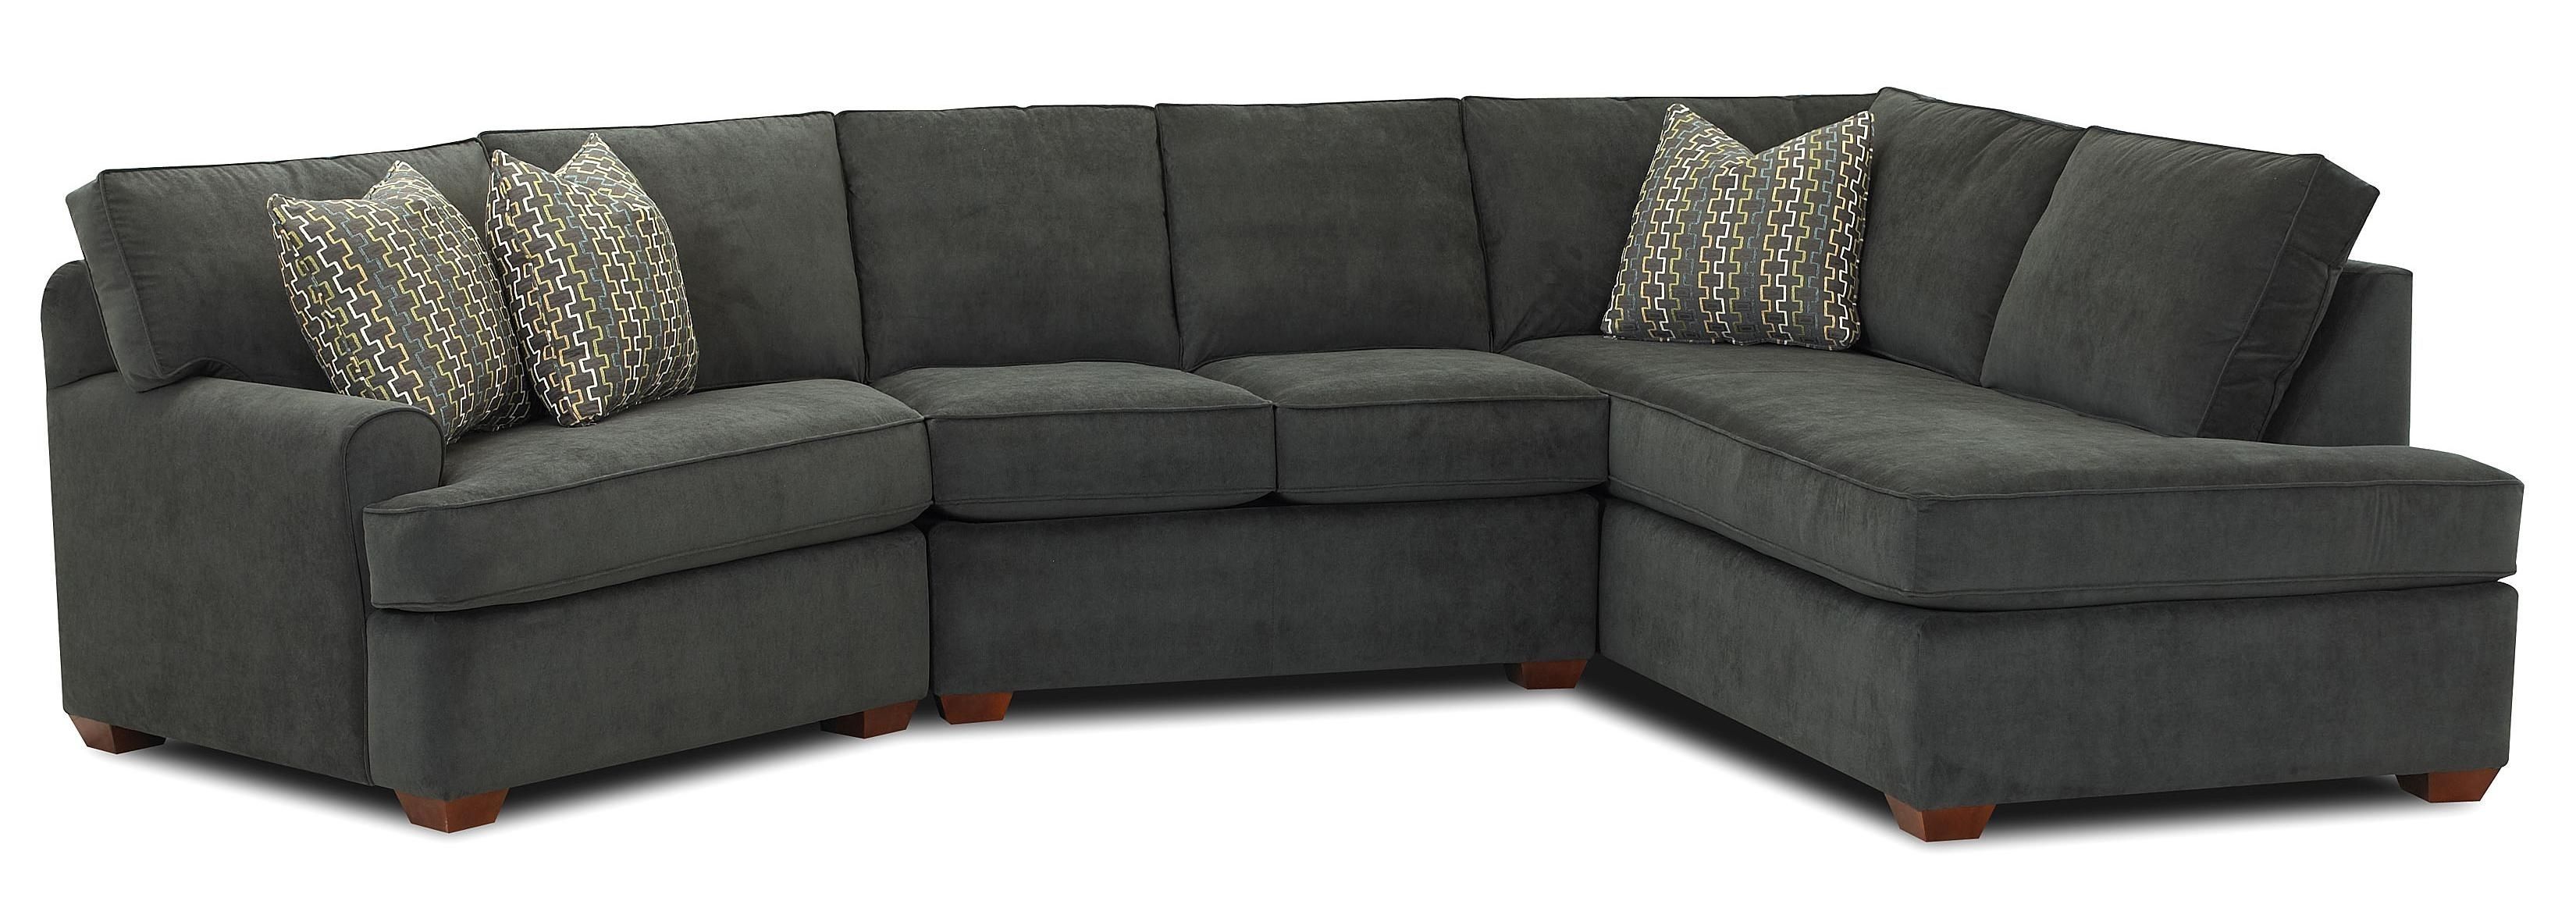 Right Angled Sectional Sofa | Http://ml2r | Pinterest Throughout Sectional Sofas At Brampton (View 3 of 15)